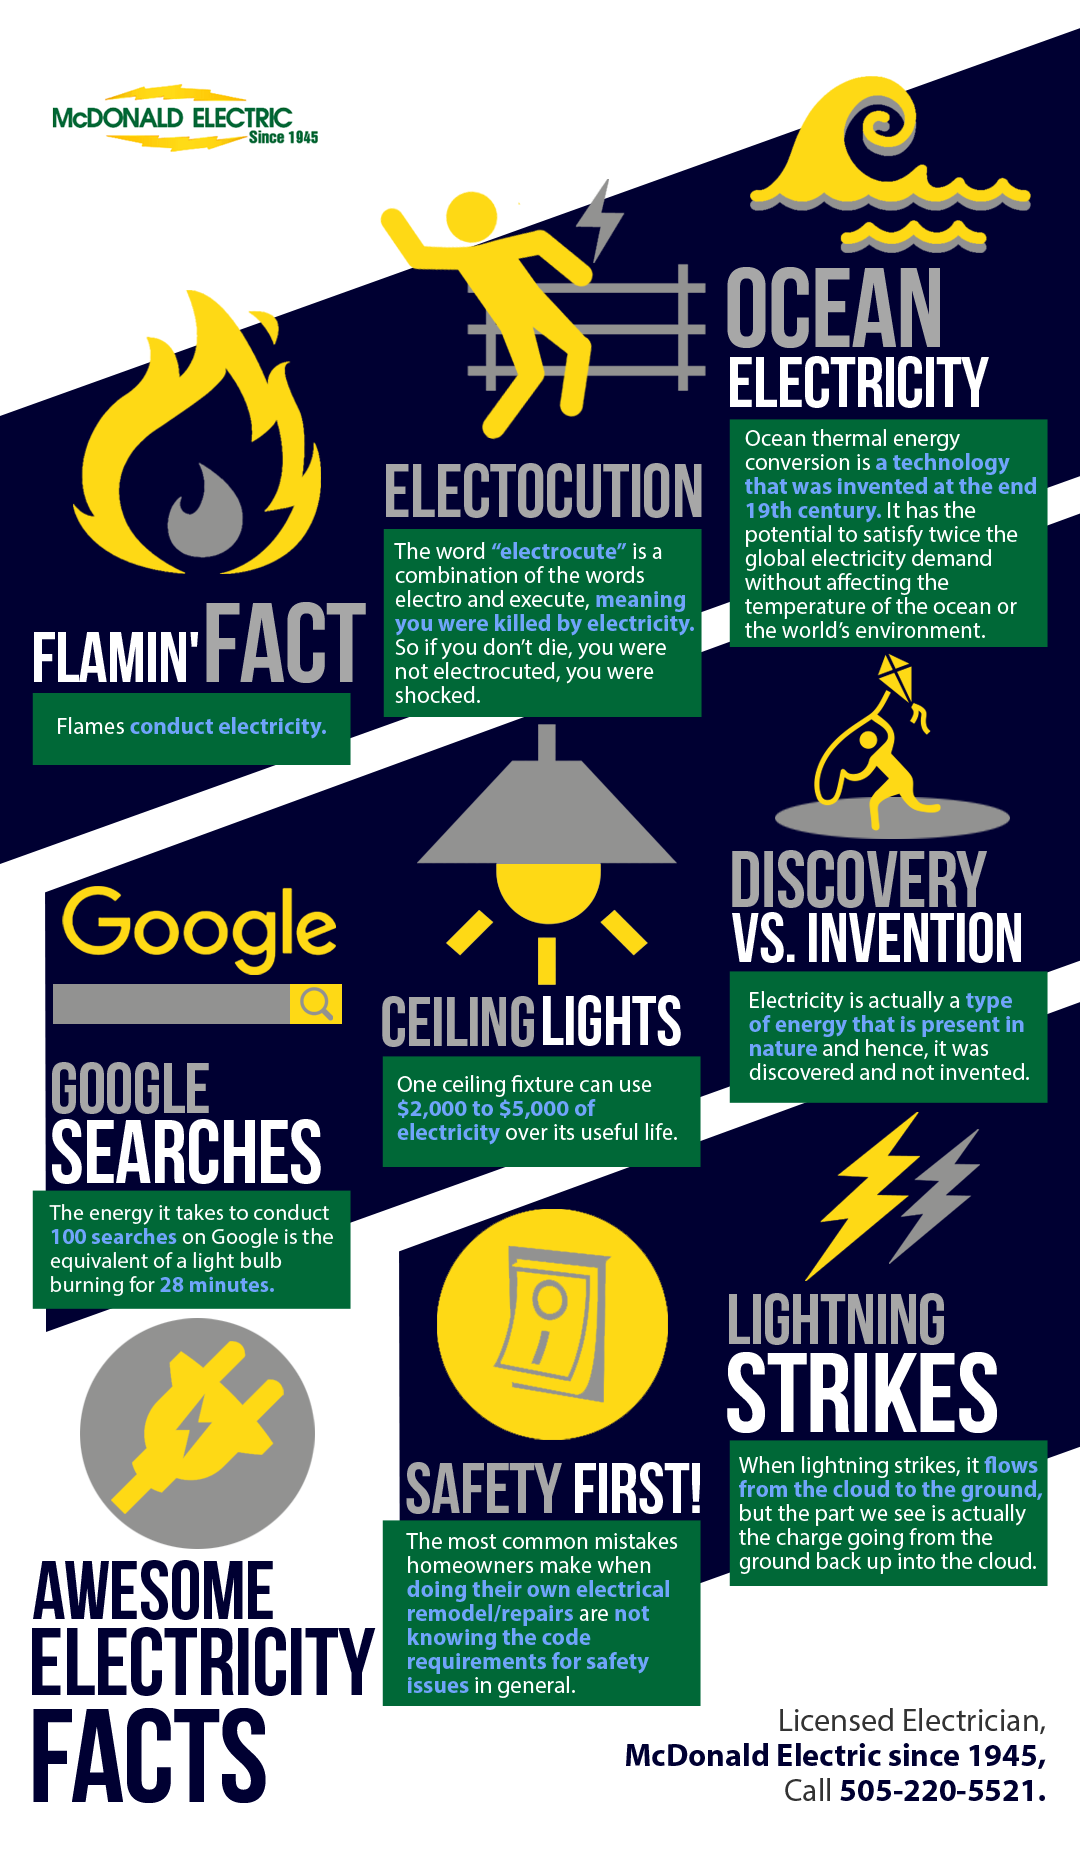 Awesome Electricity Facts | Shared Info Graphics